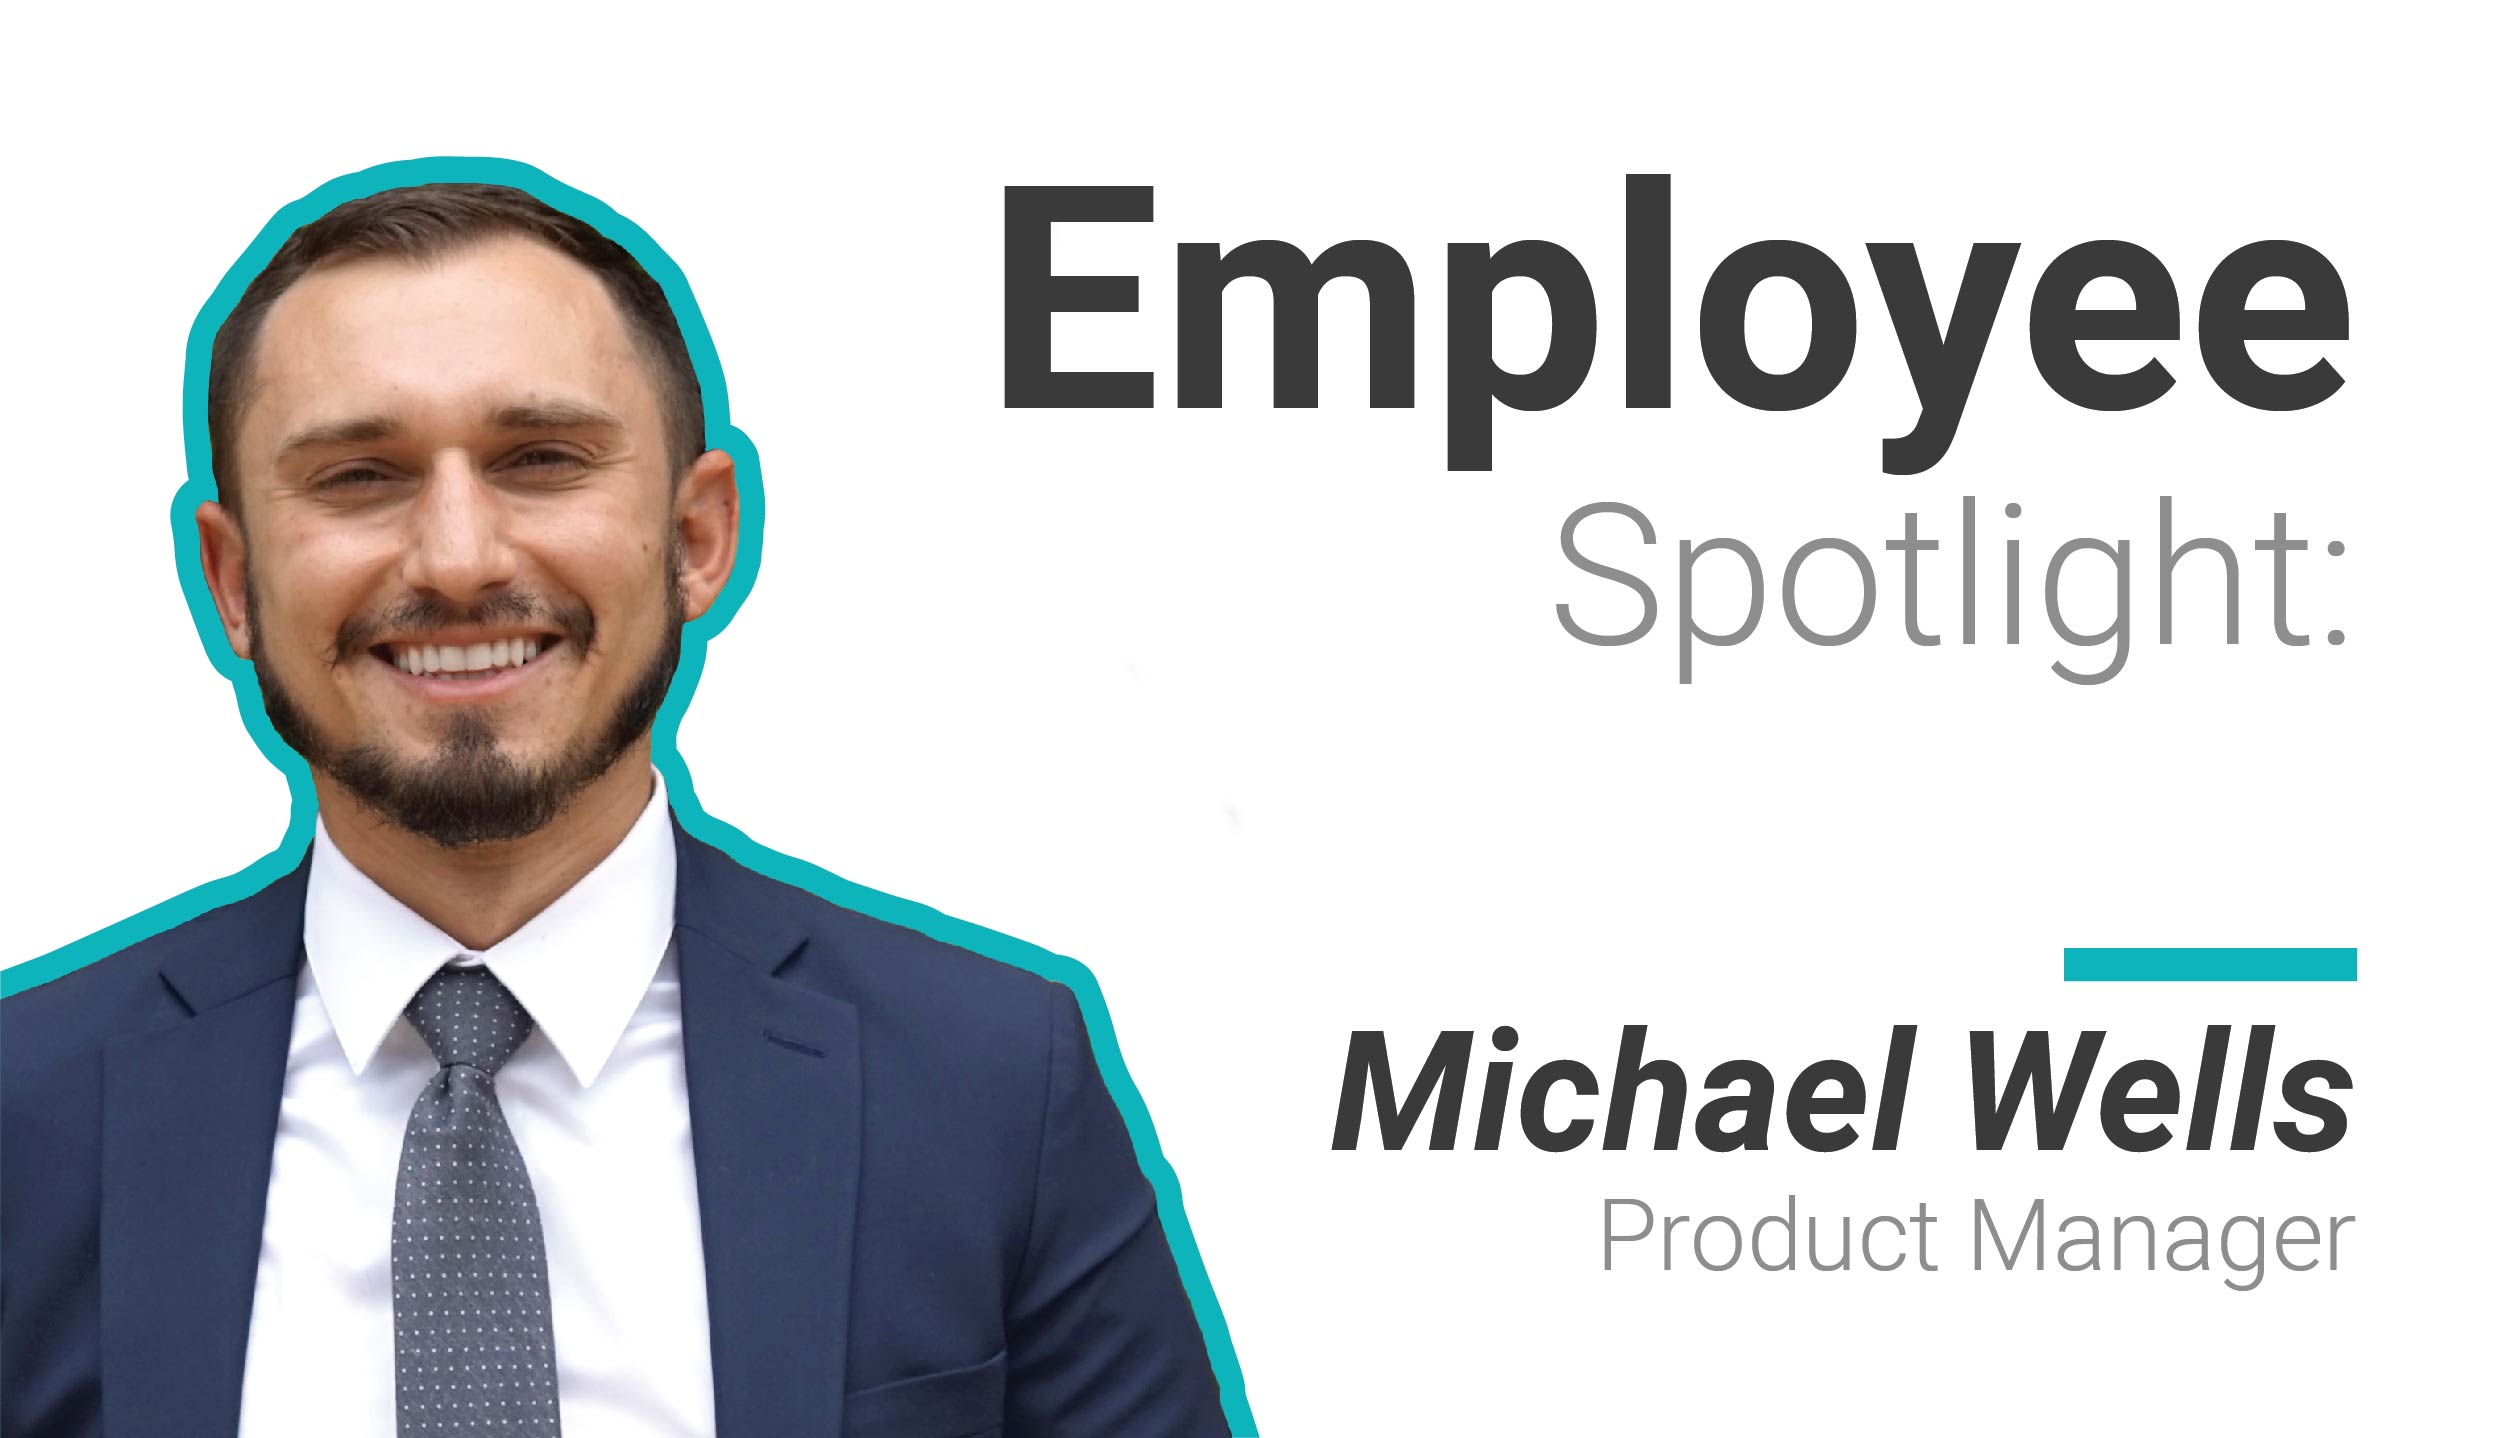 Employee Spotlight: Michael Wells, Product Manager